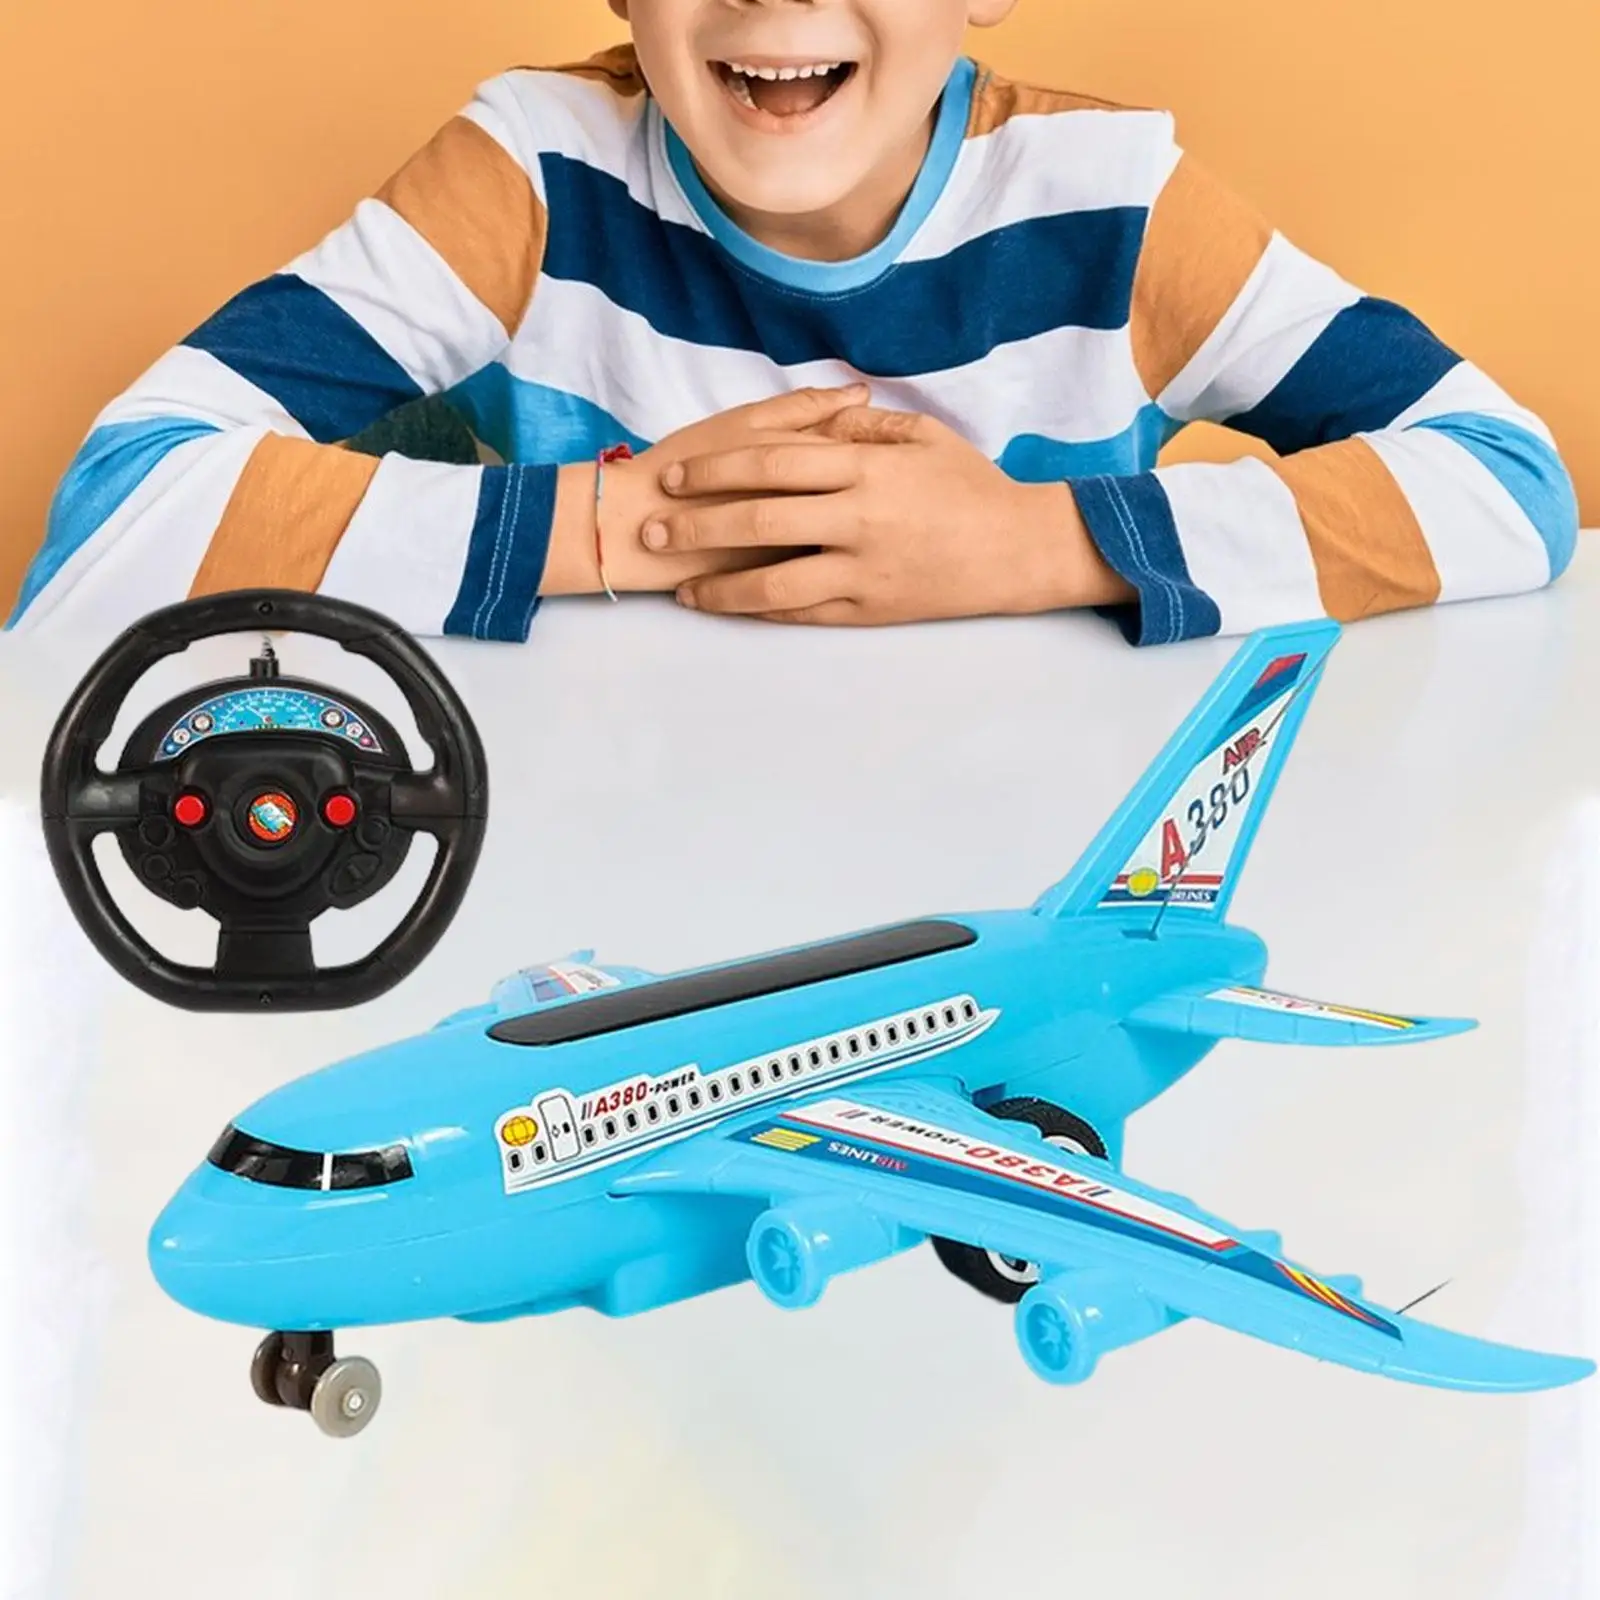 Remote Control Airplane Model Toy 2CH Forward/Backward Aircraft for Toddlers